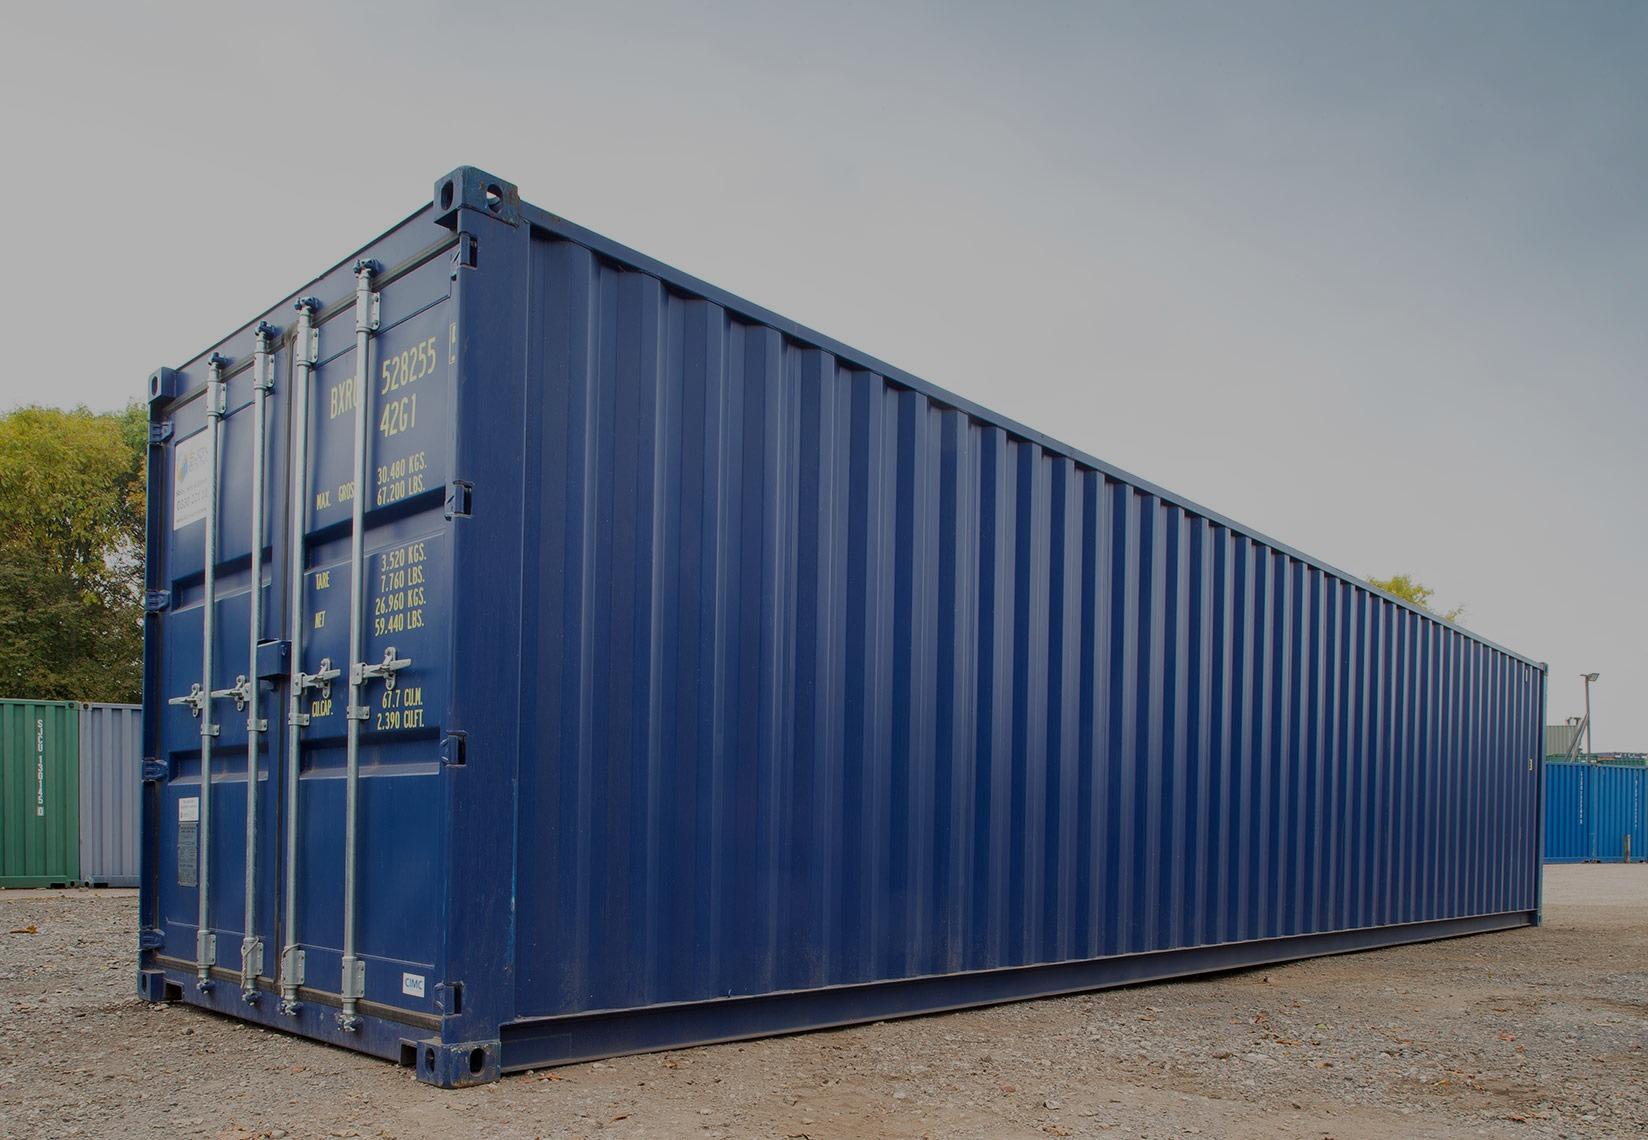 ideal as storage containers Used 40ft container for sale Birmingham